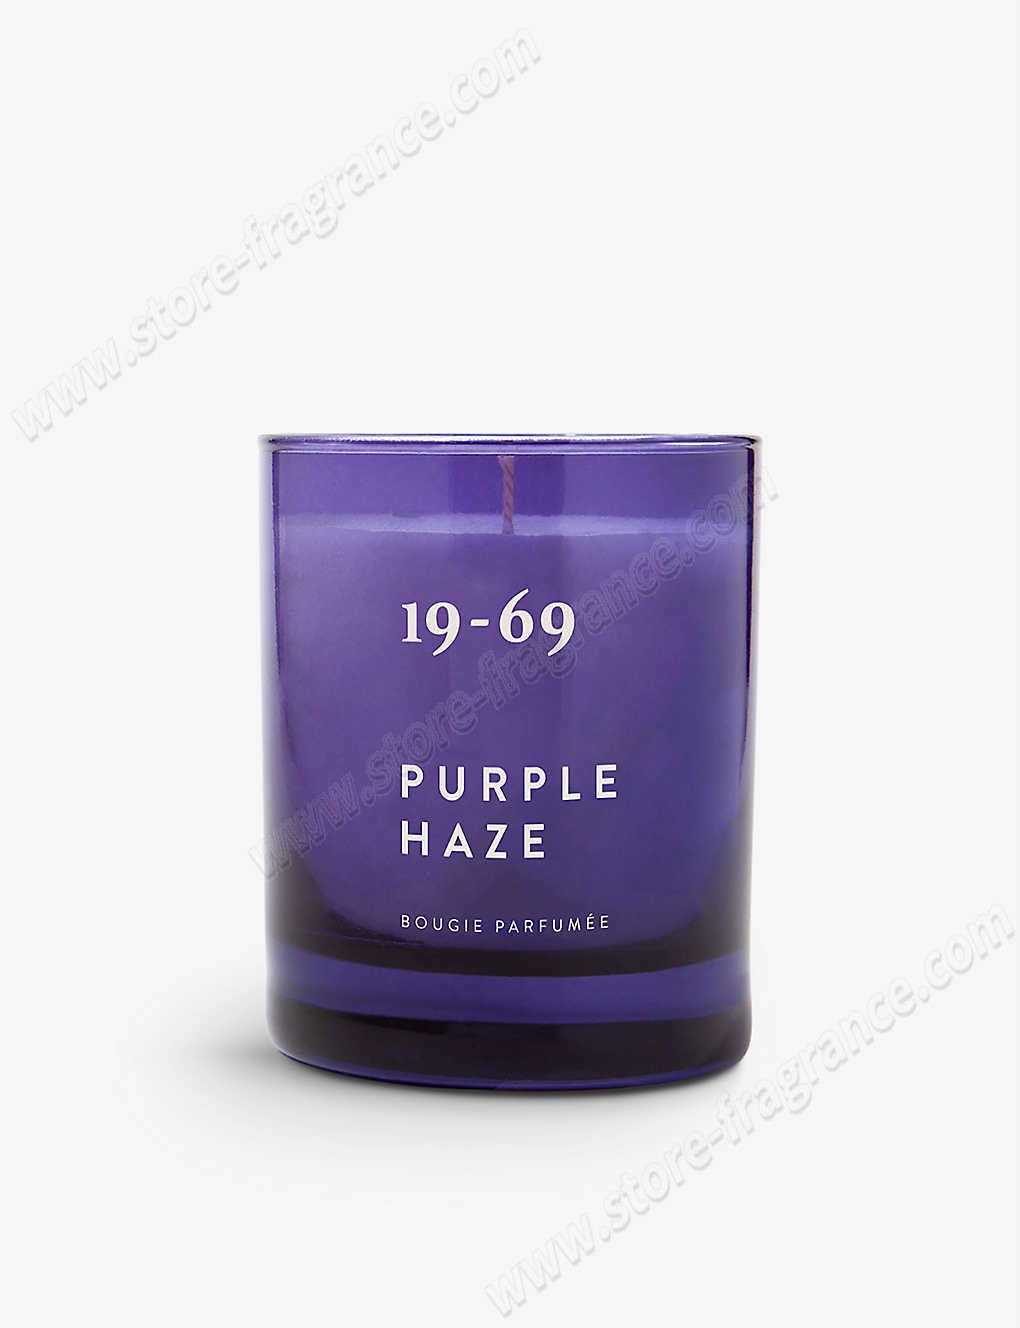 19-69/Purple Haze vegetable-wax scented candle 200ml ✿ Discount Store - -0